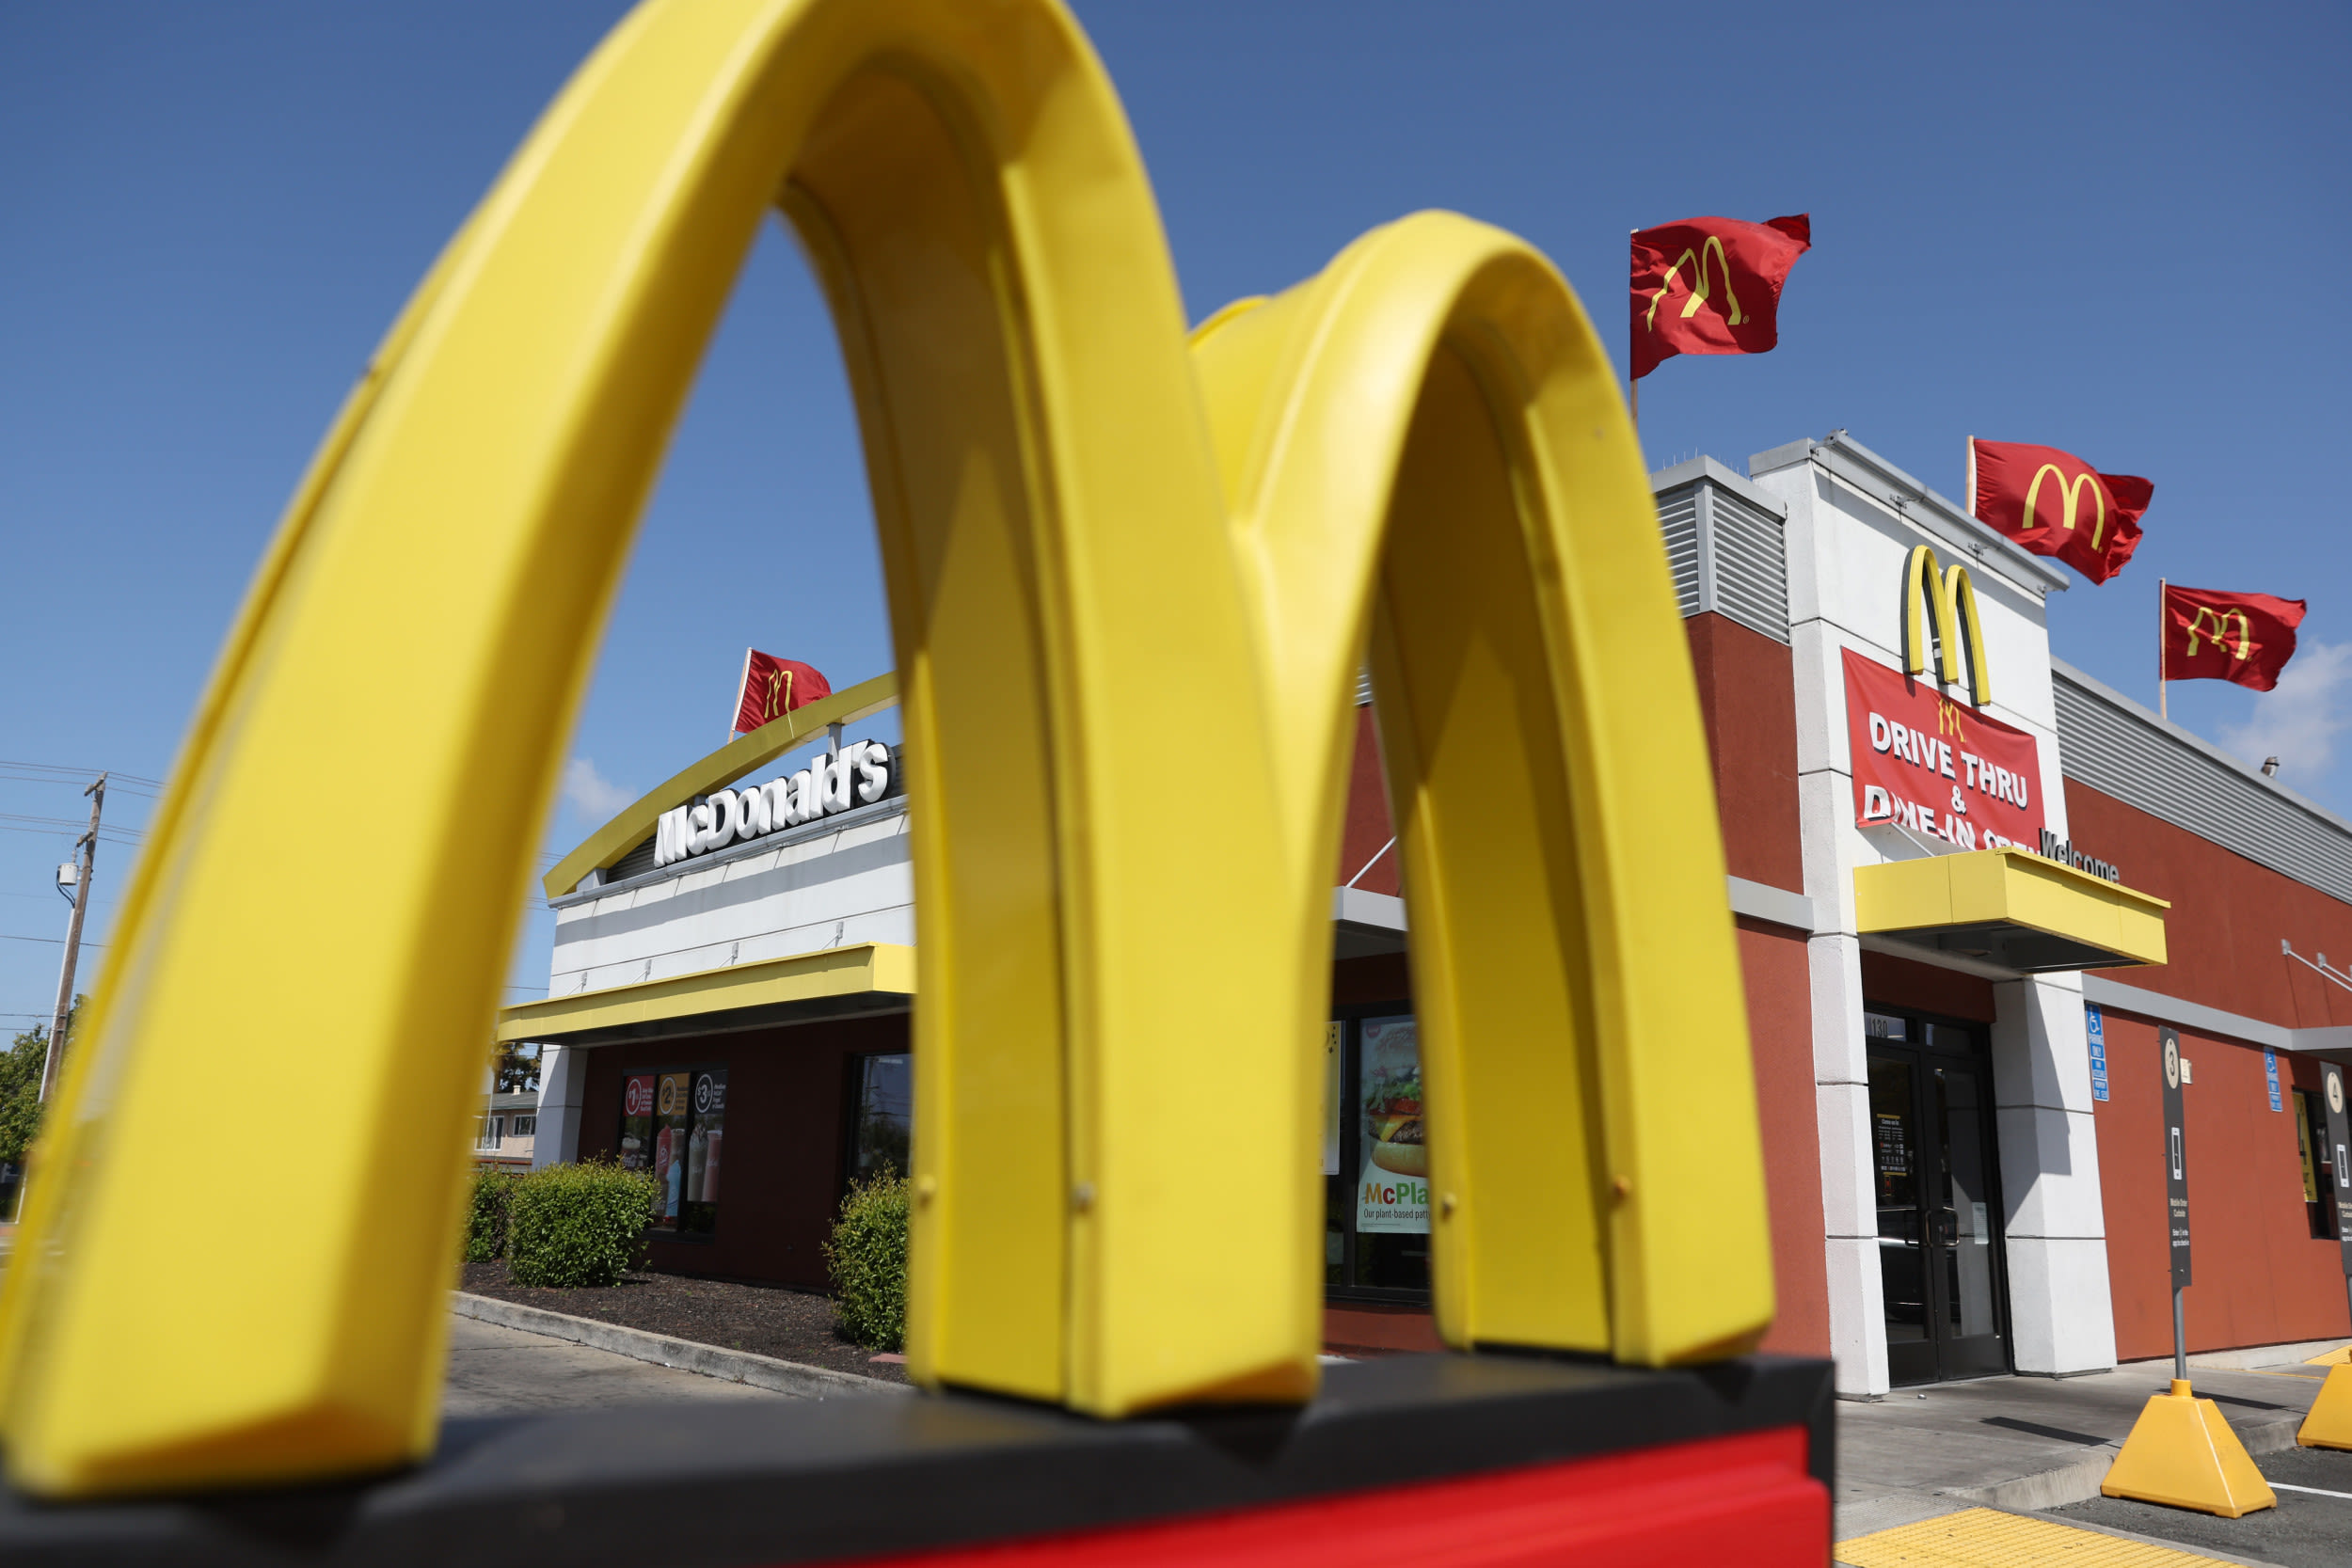 McDonald's gives away free chicken nuggets: Here's how to get them